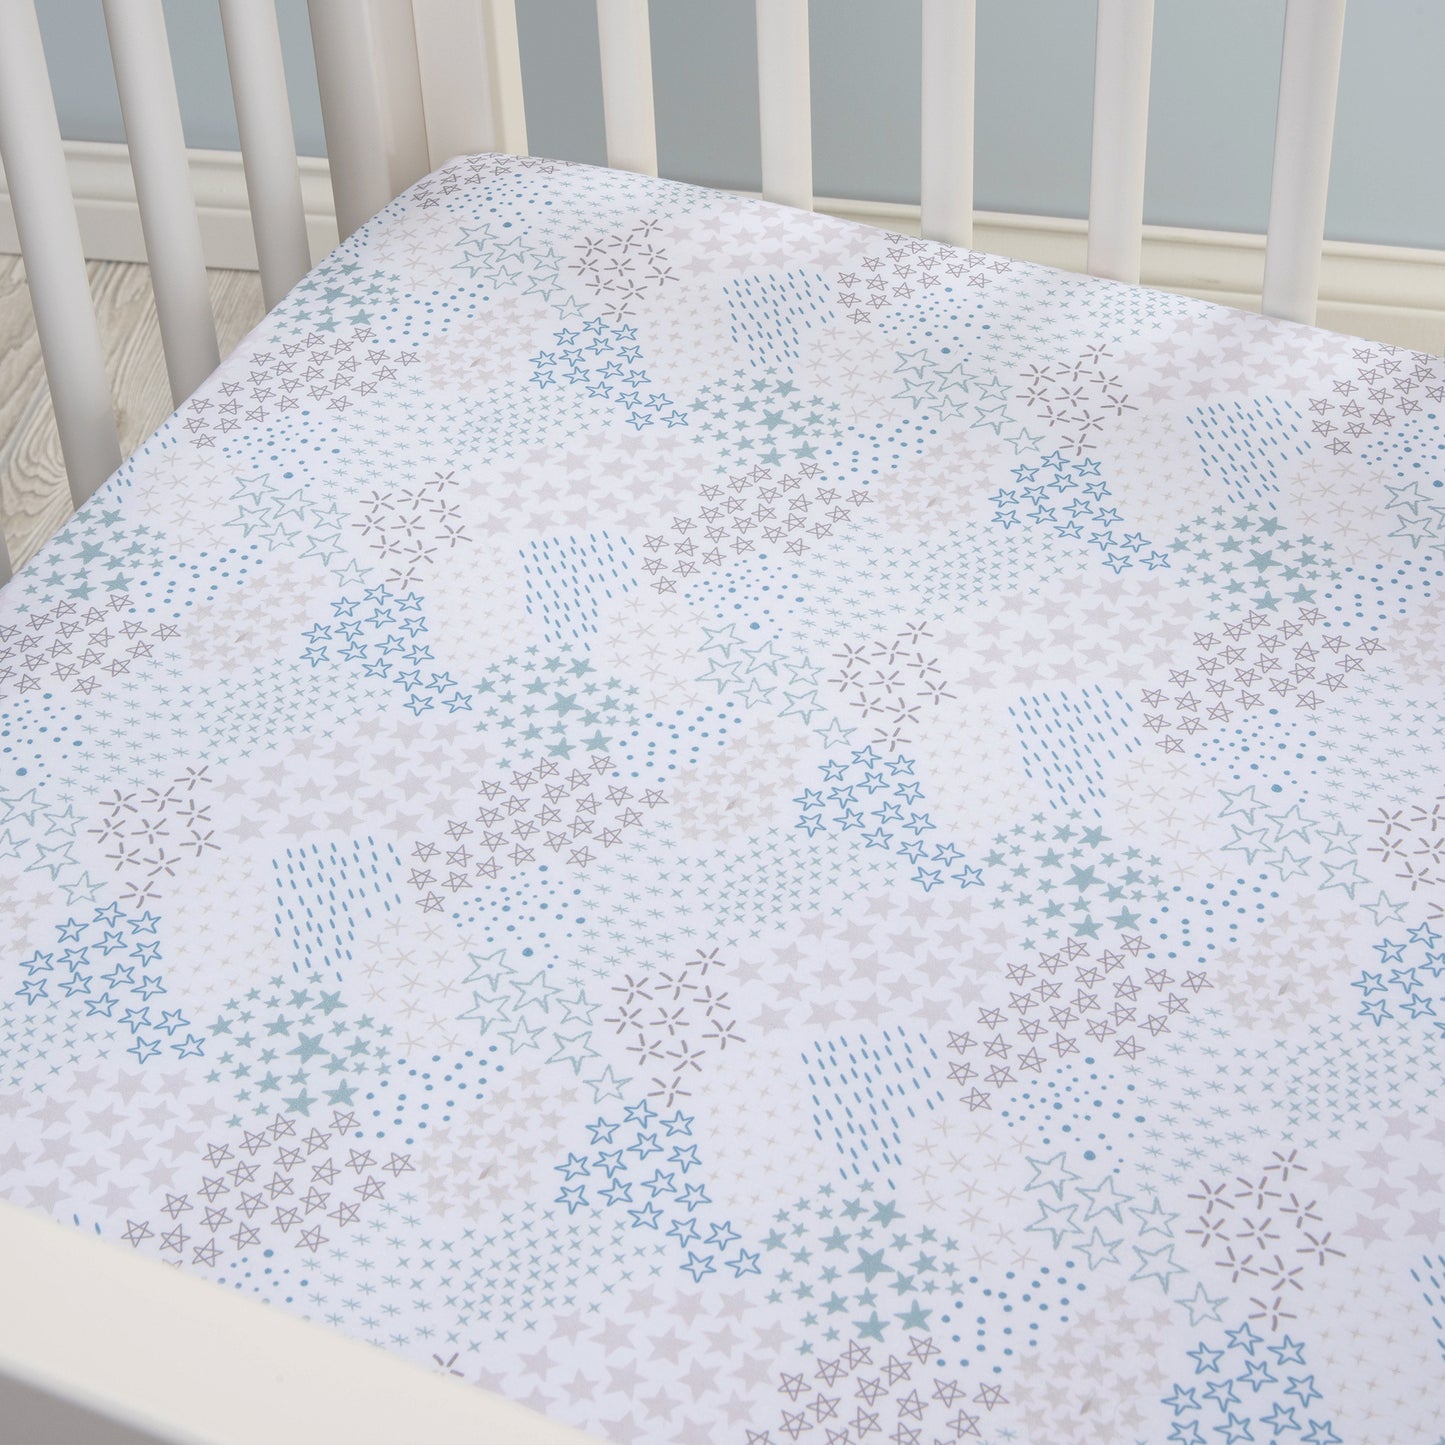 Trend Lab Starry Night Fitted Crib Sheet stylized on a crib mattress in a white crib, picture taken at an corner angle view.